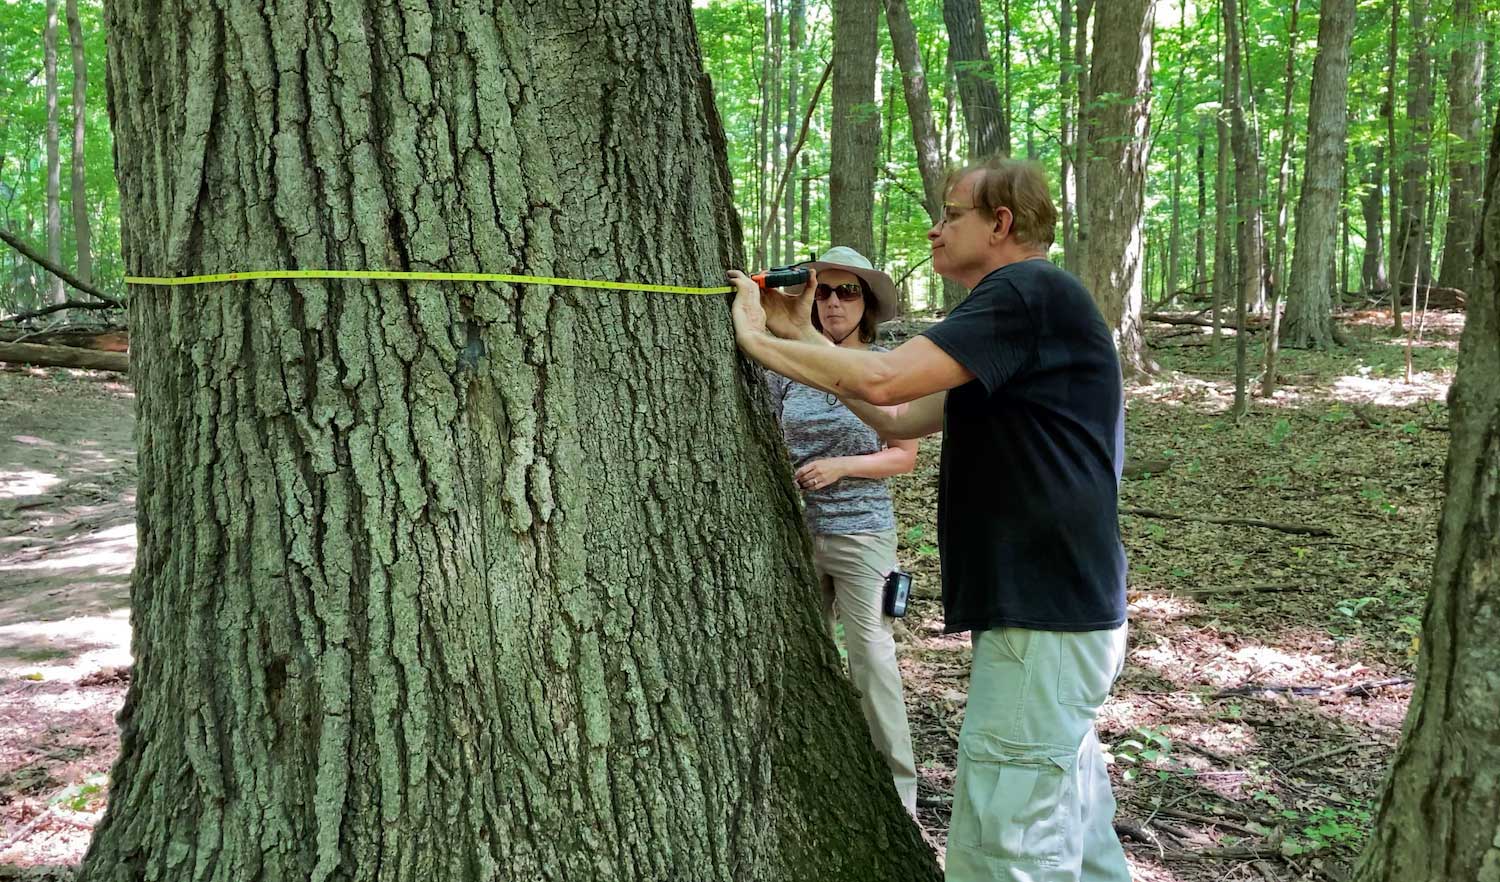 A man using a tape measure to measure the circumference of a tree.